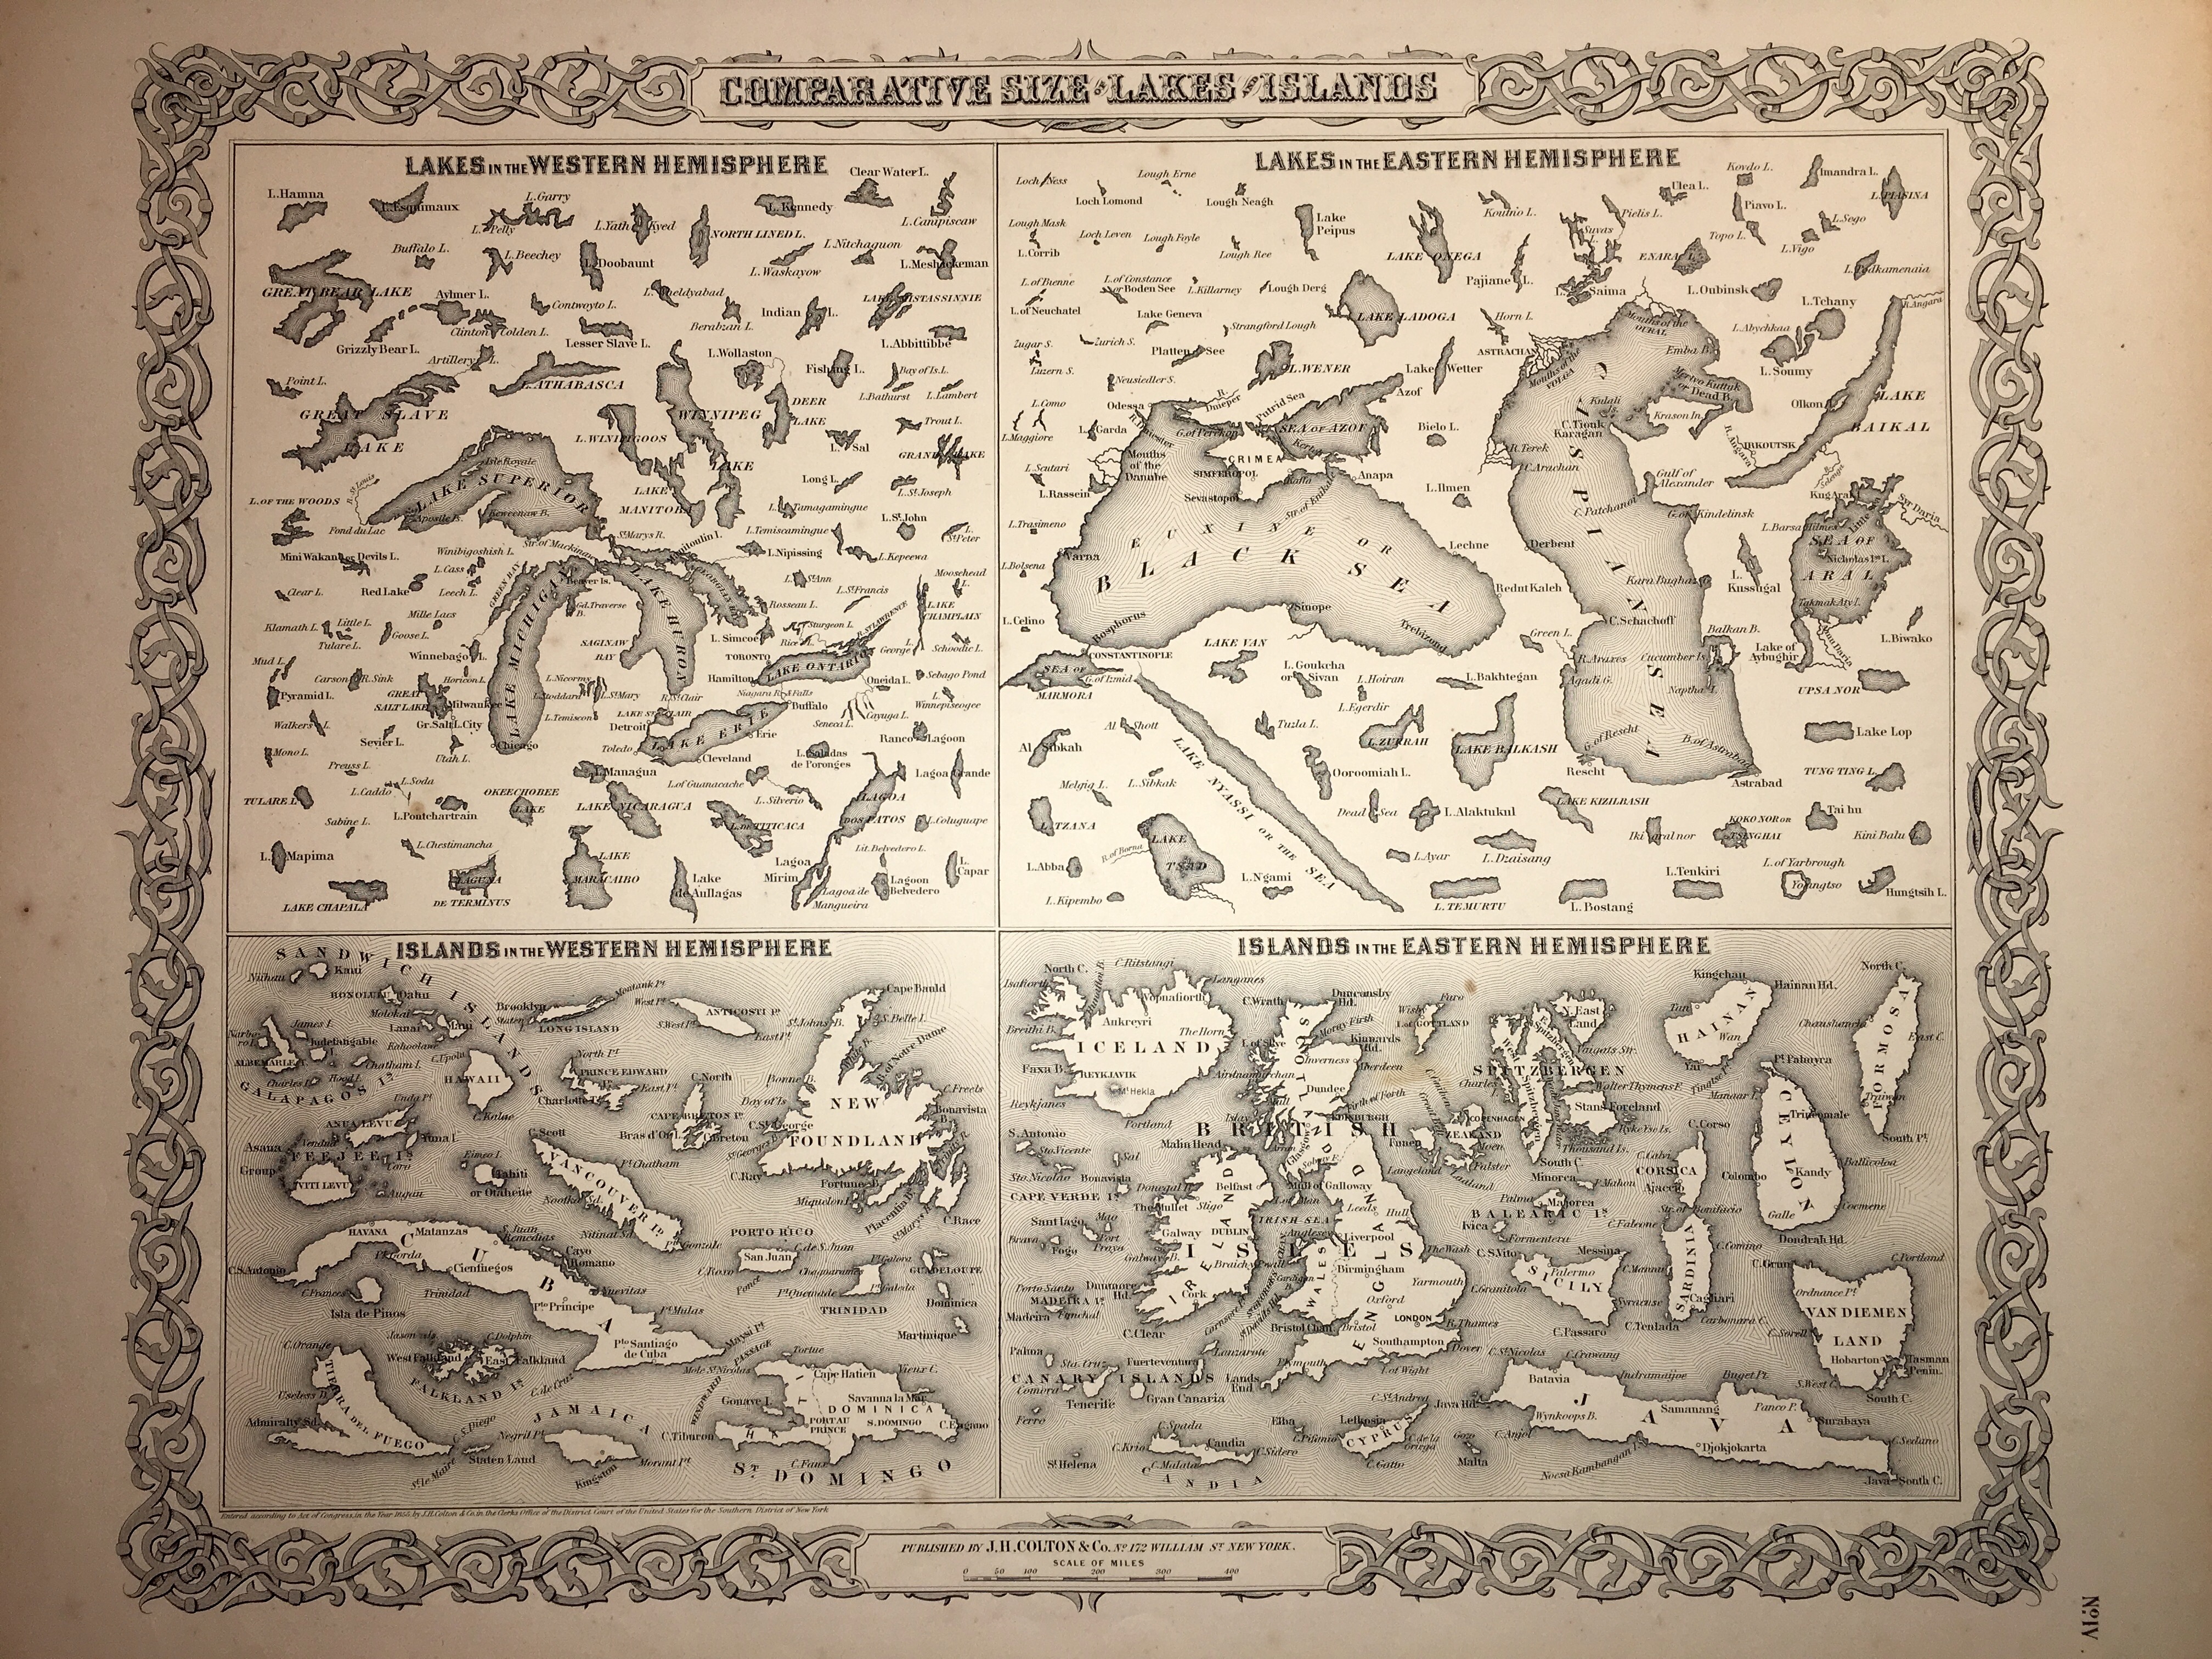 Comparative size of Lakes and Islands - 1855